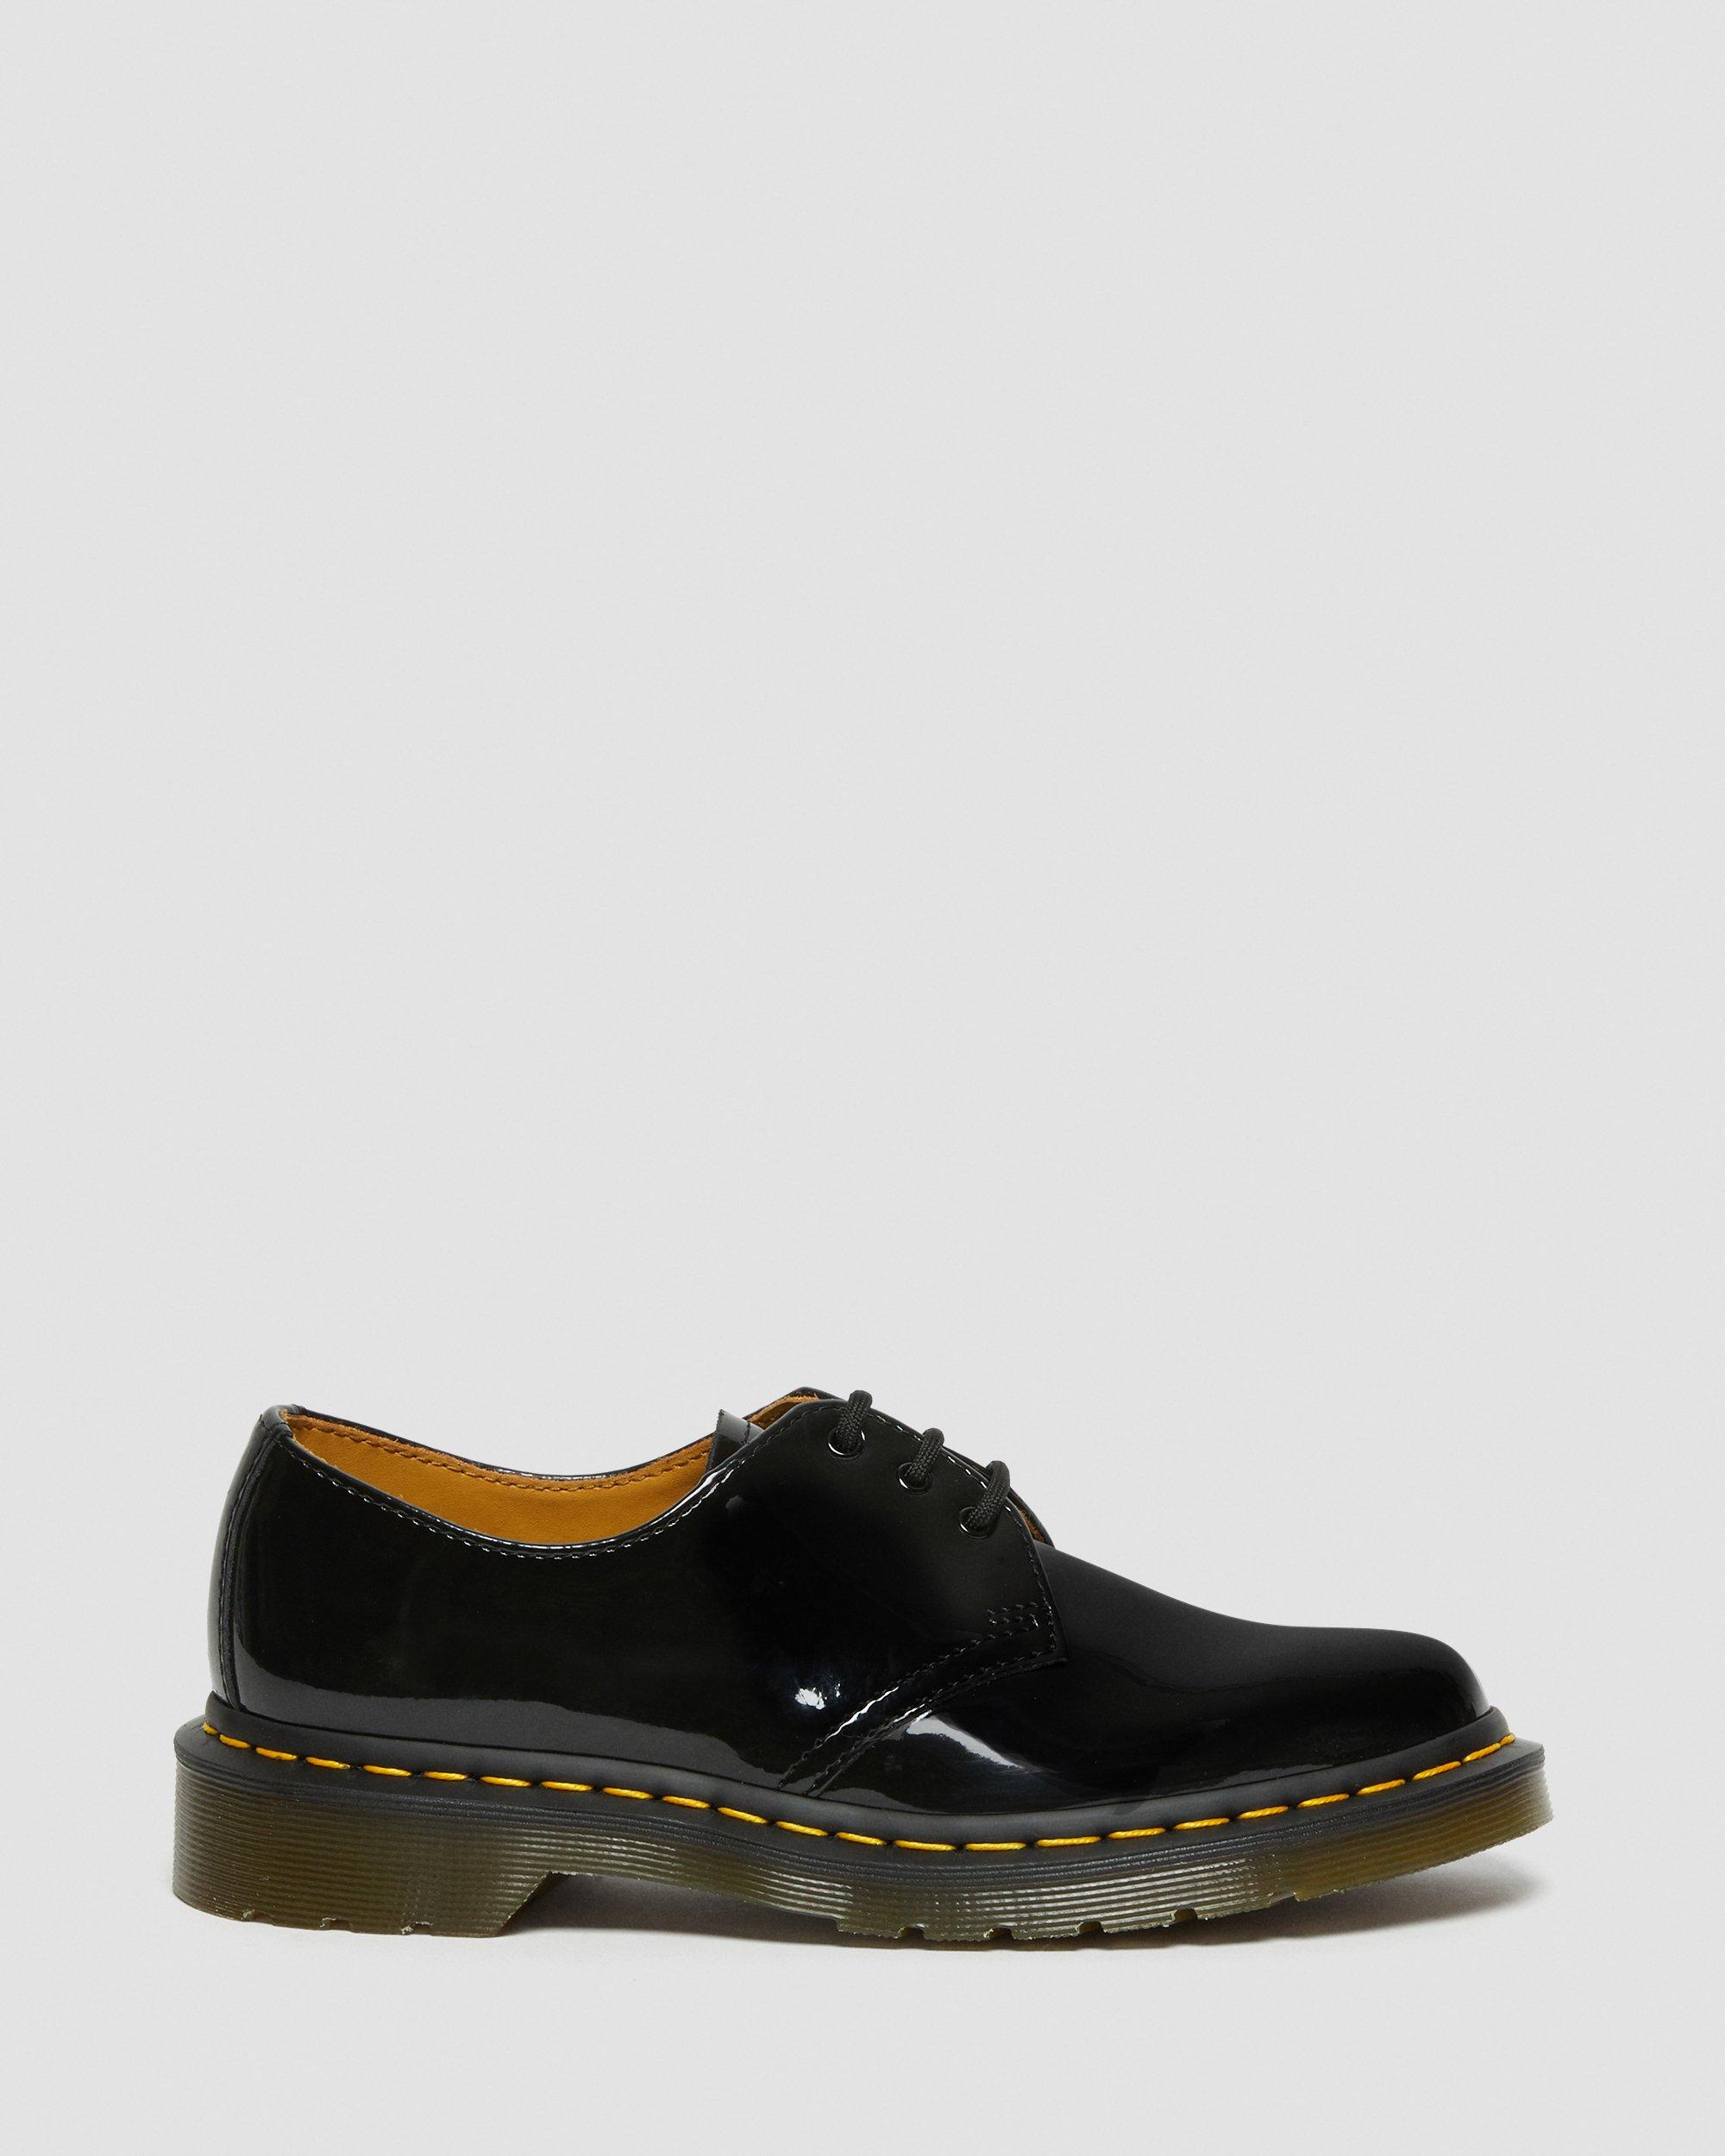 1461 Women's Patent Leather Oxford Shoes in Black